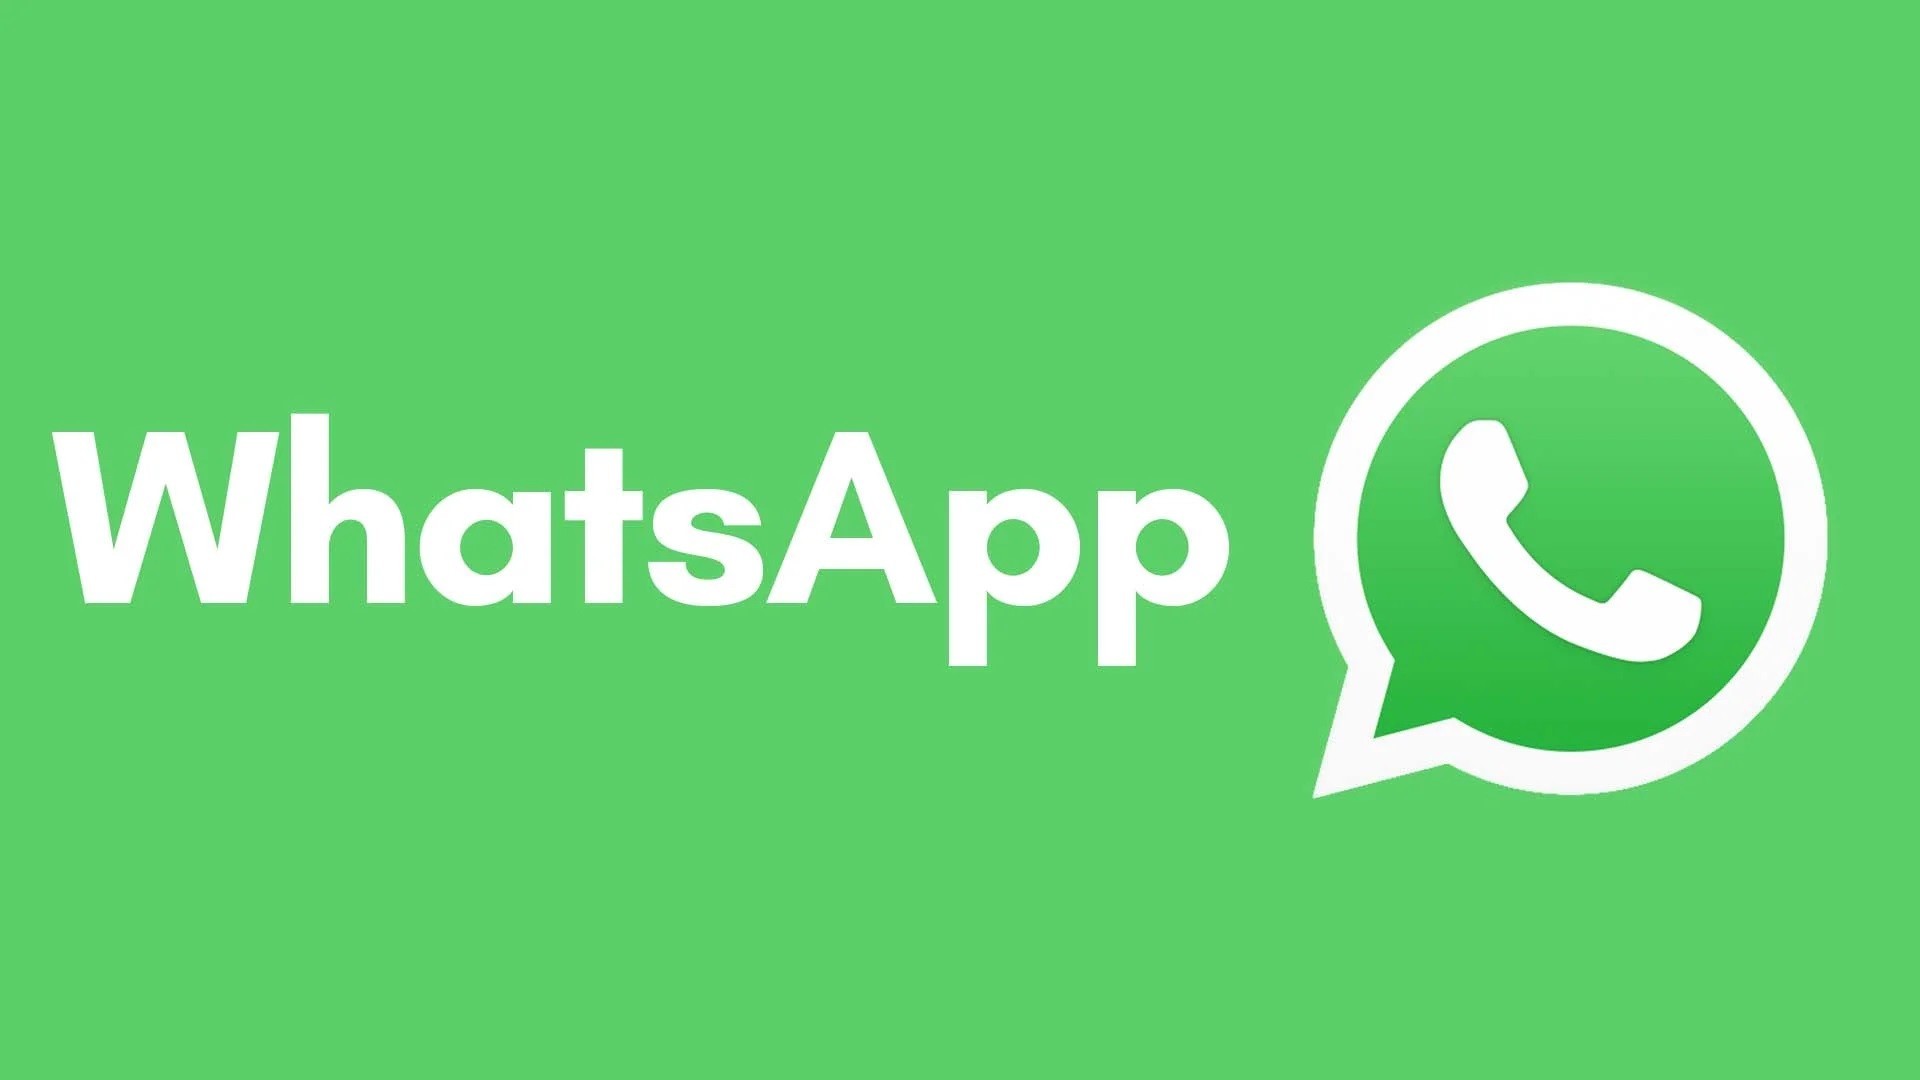 WhatsApp Beta: Get Early Access to New Features and Improvements